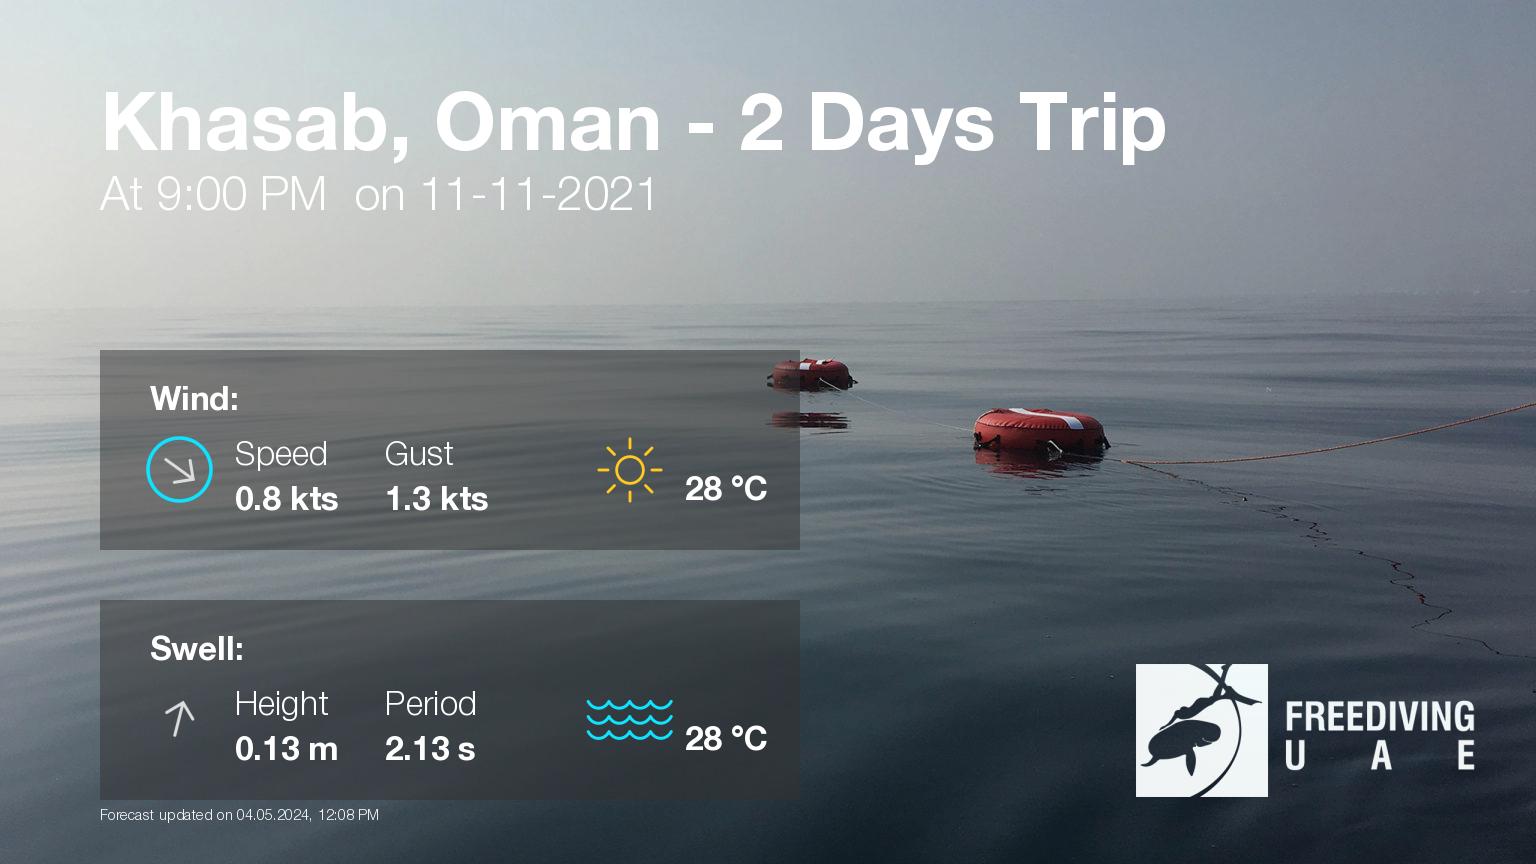 Expected weather during Khasab, Oman – 2 Days Trip on Thu, Nov 11, at 9:00 PM